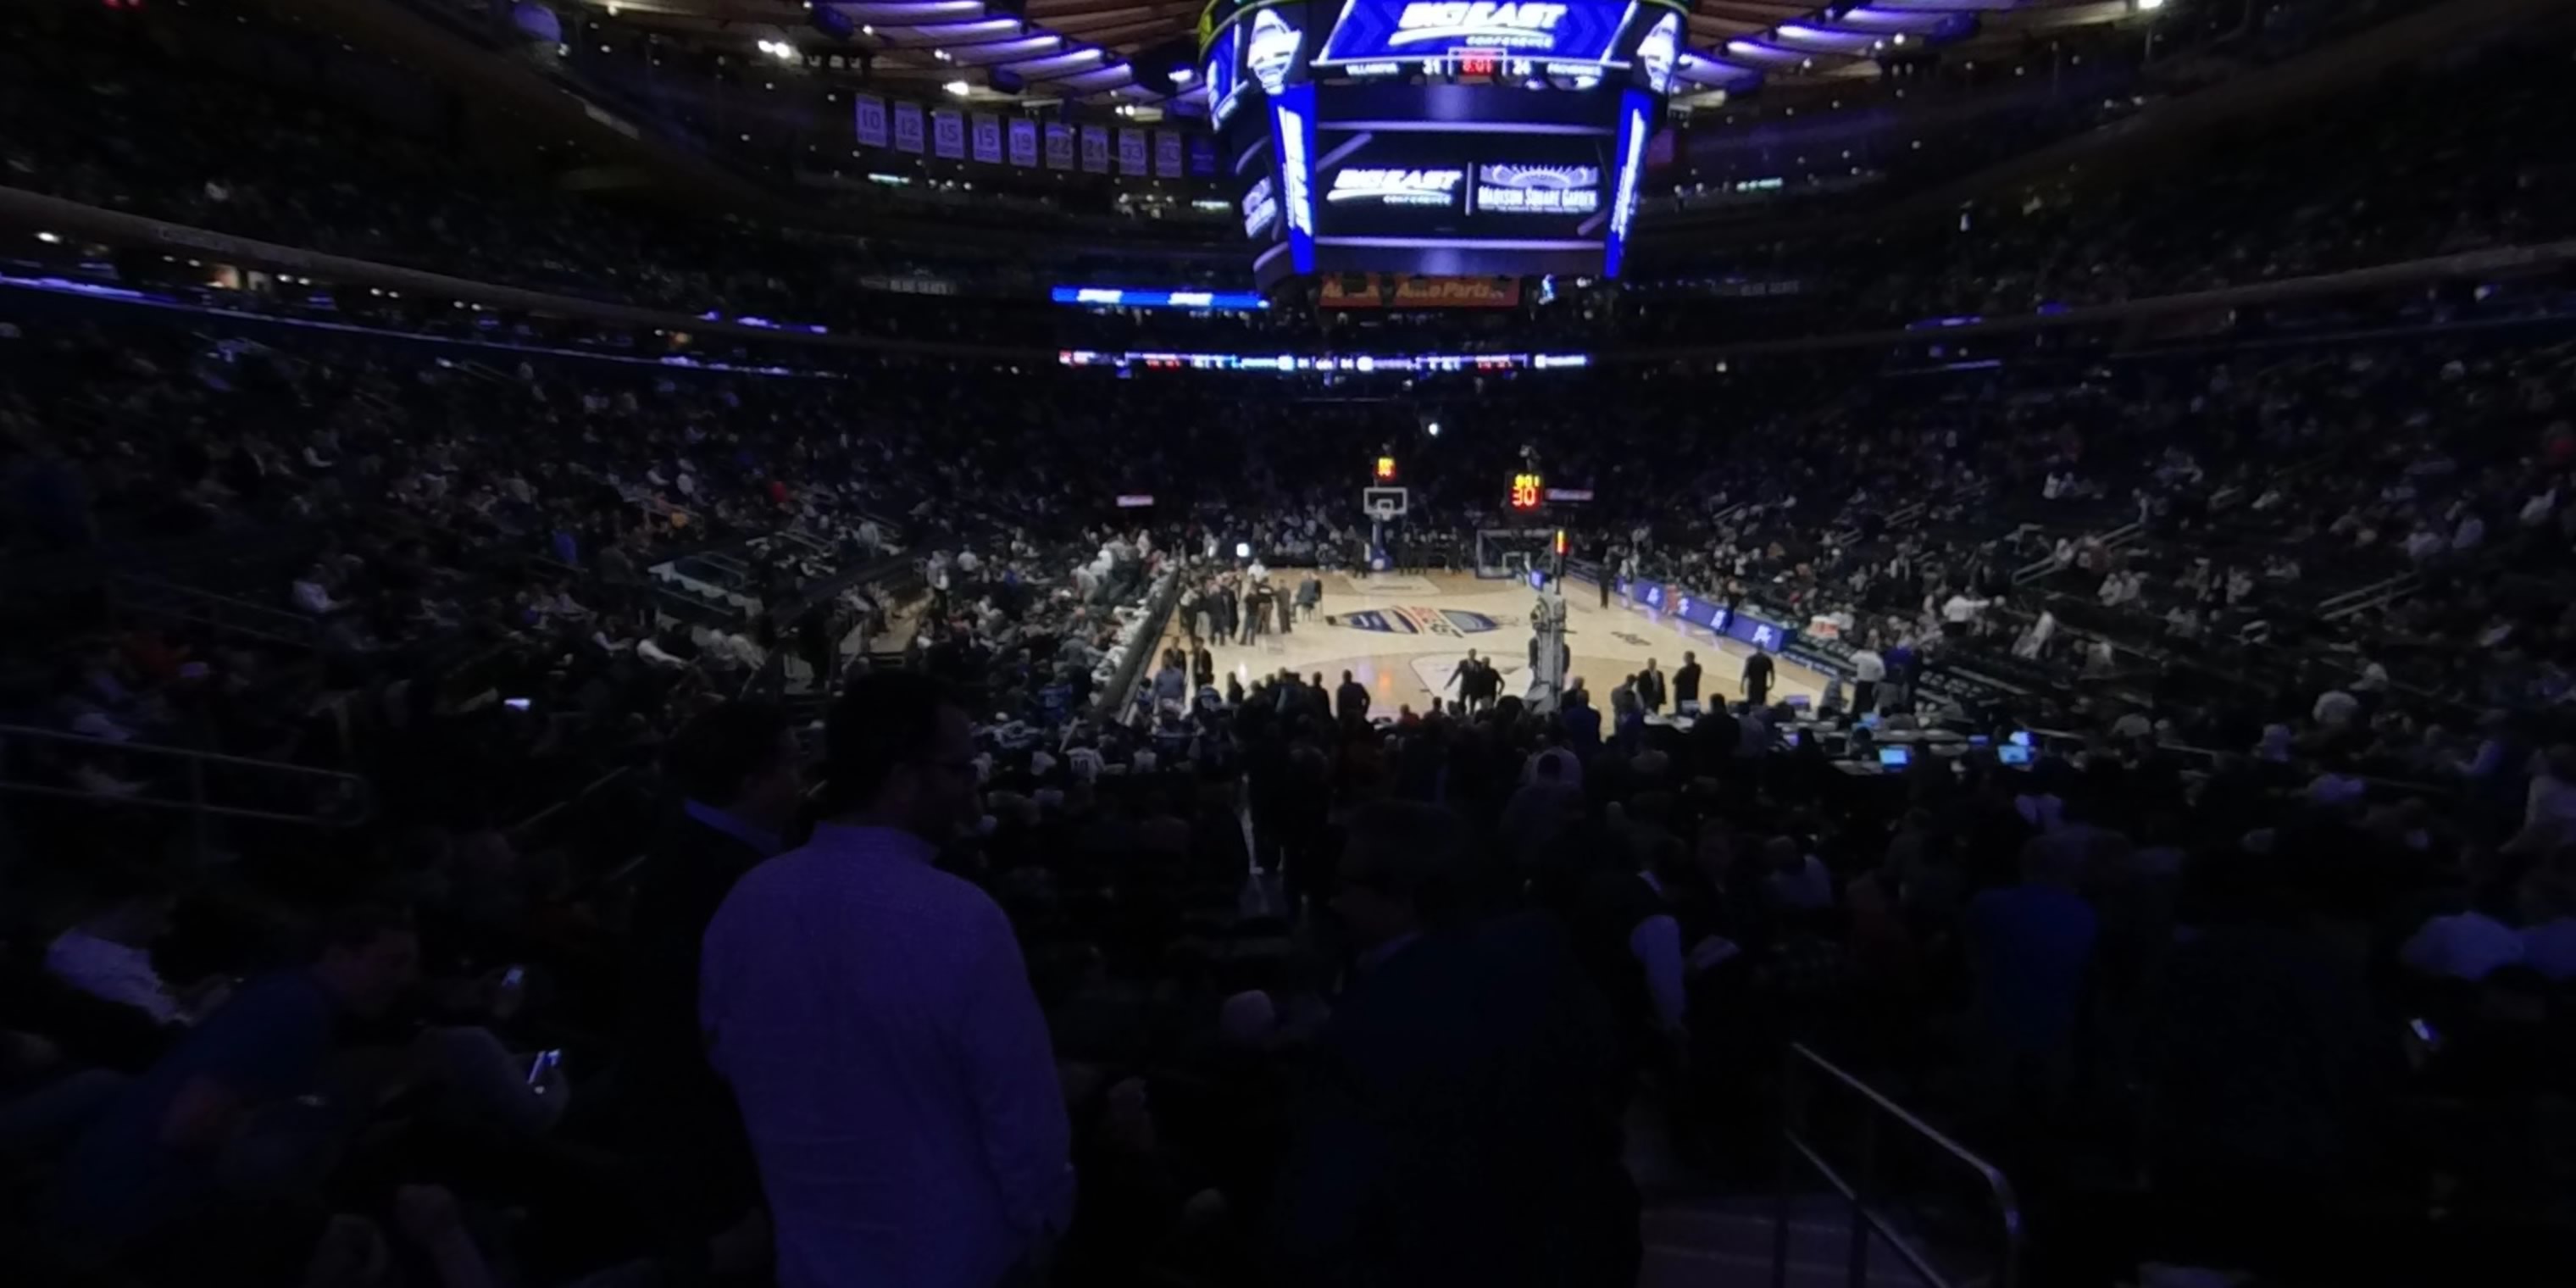 section 101 panoramic seat view  for basketball - madison square garden